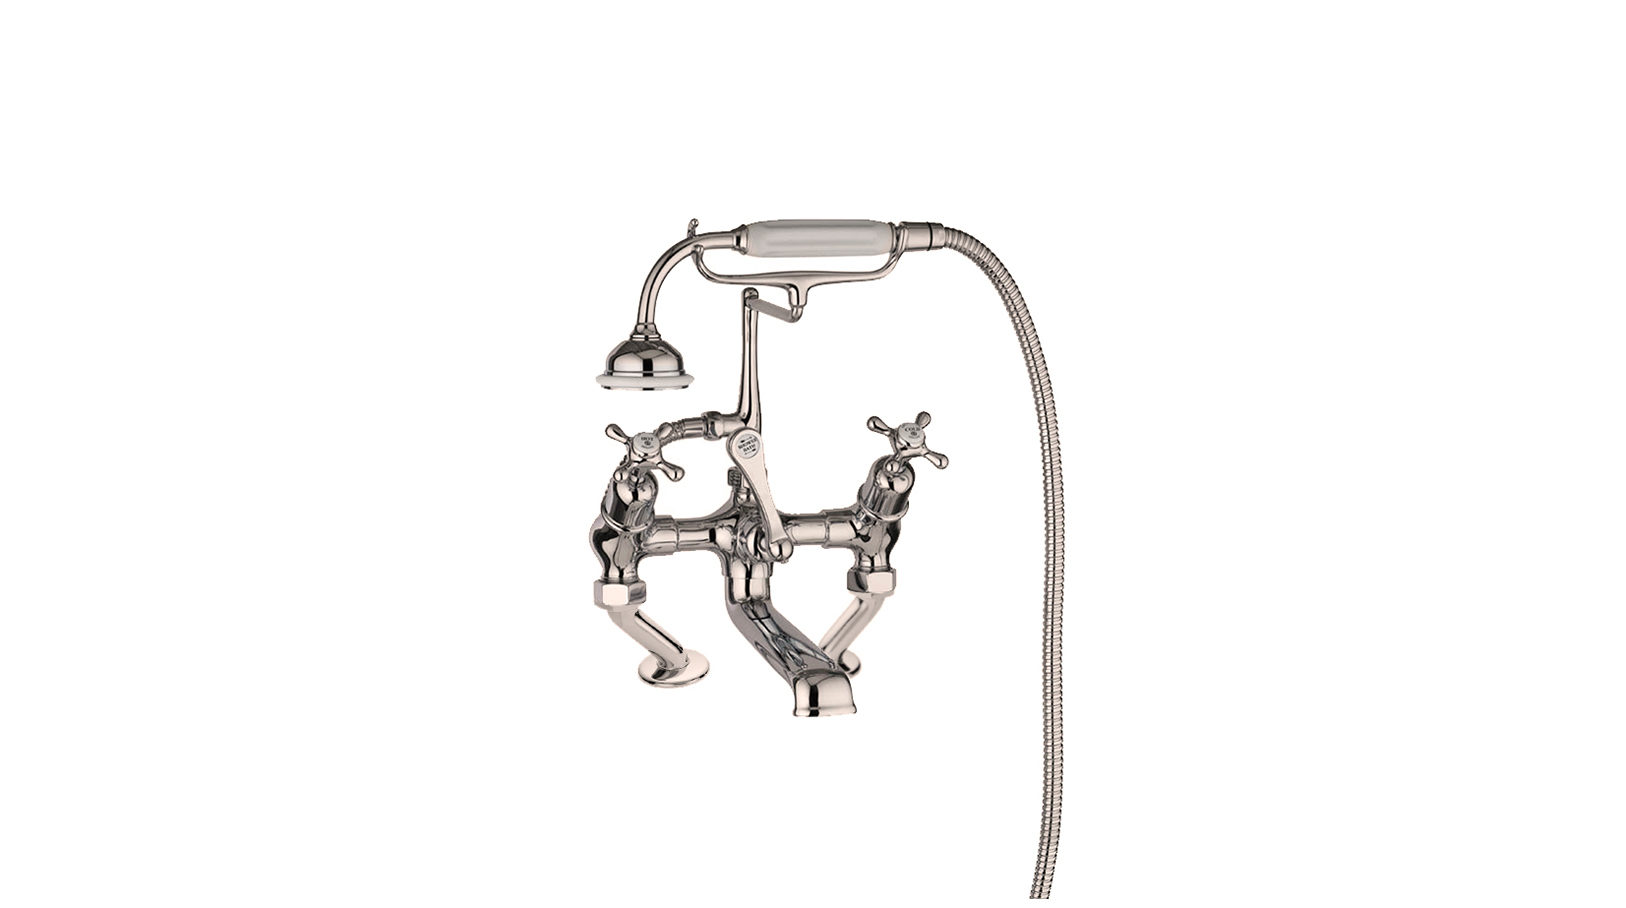 The Mull Deck Mounted  Bath & Shower Mixer